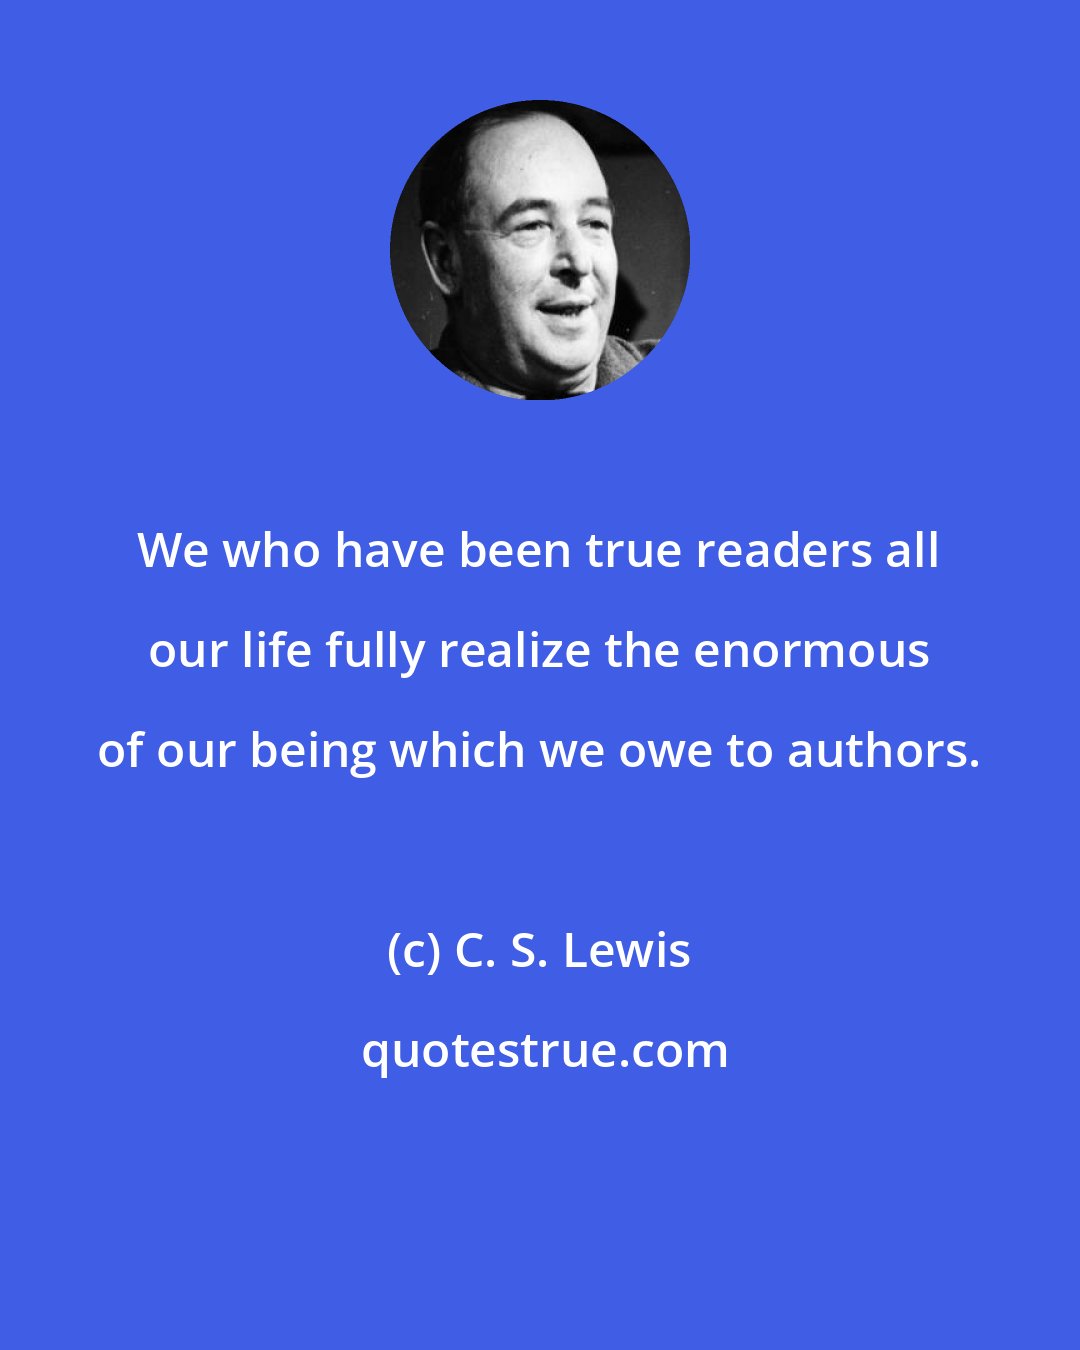 C. S. Lewis: We who have been true readers all our life fully realize the enormous of our being which we owe to authors.